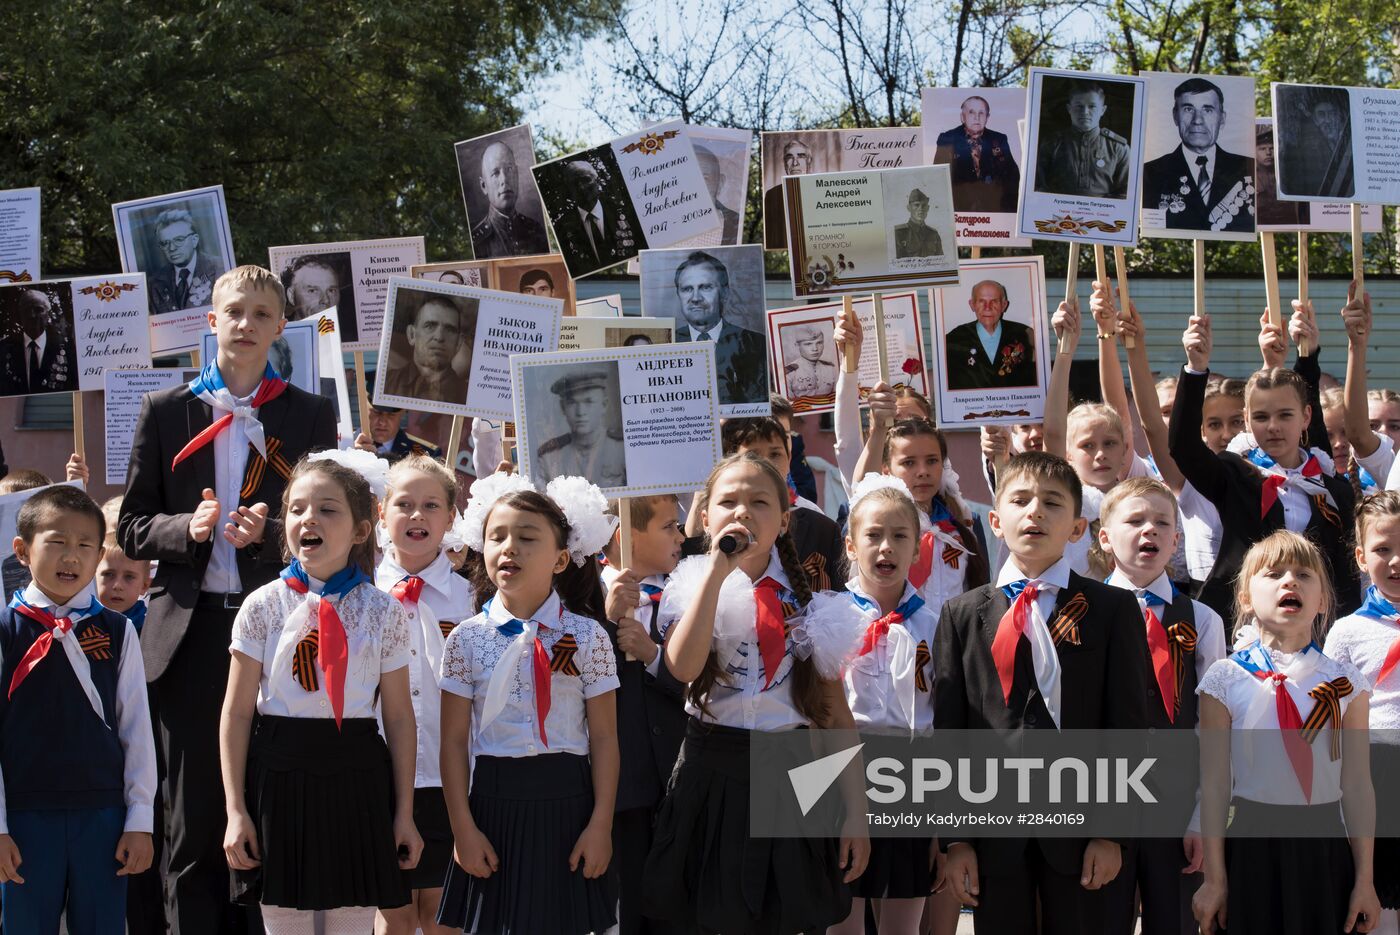 Immortal Regiment event at CSTO military base in Kyrgyzstan